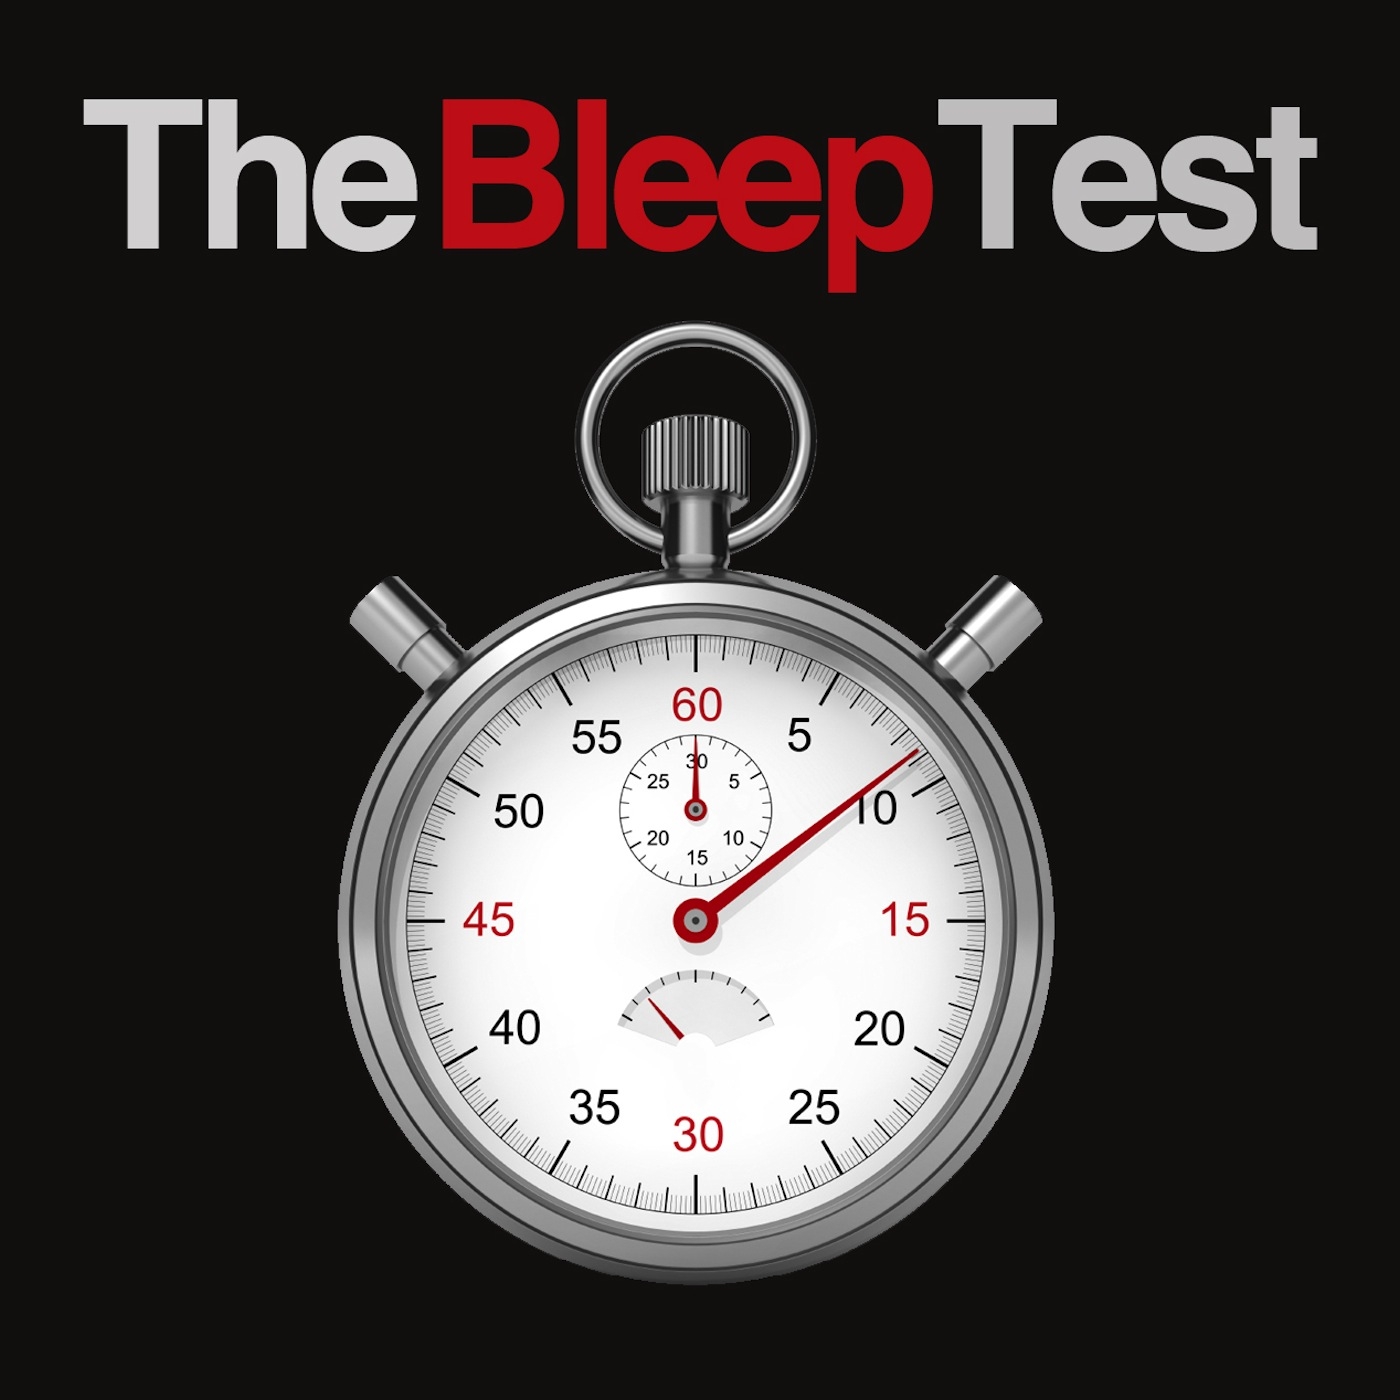 The Bleep Test: 20 Metre (Complete Test)